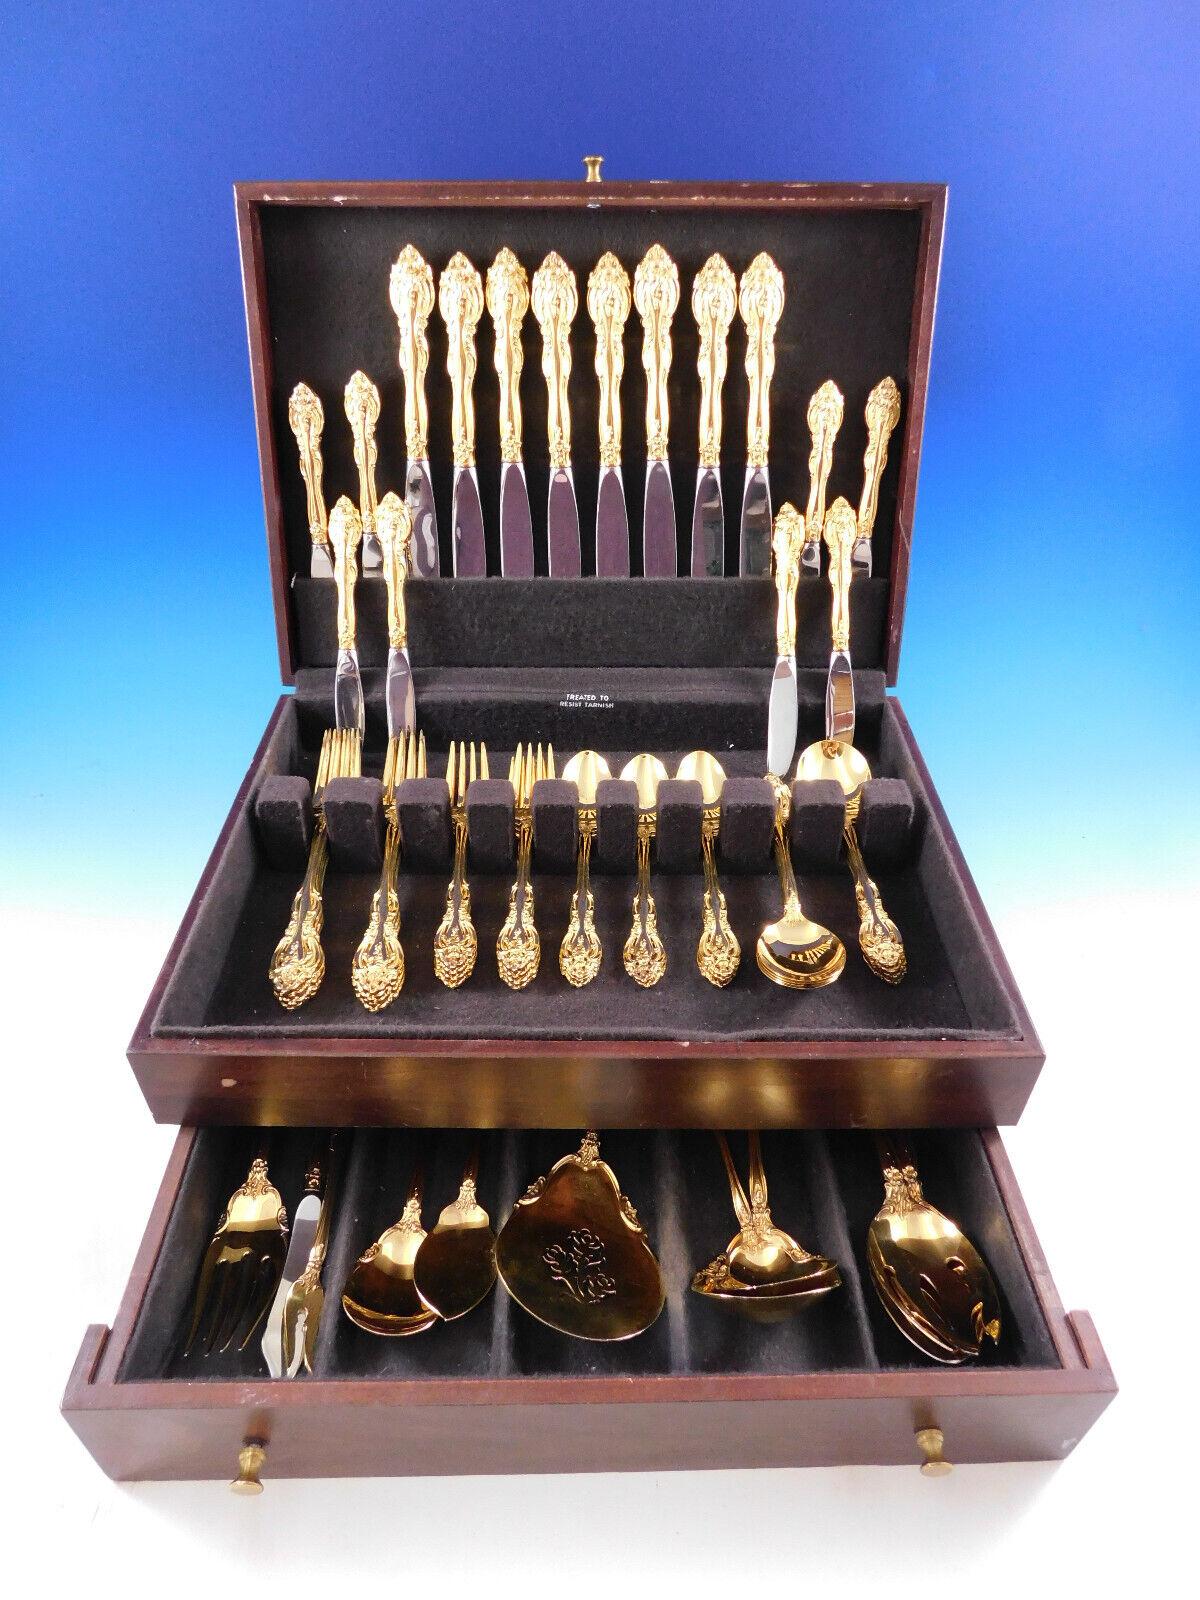 La Scala Gold by Gorham Sterling Silver flatware set - 58 pieces. This set is vermeil (completely gold-washed) and includes:

8 Knives, 9